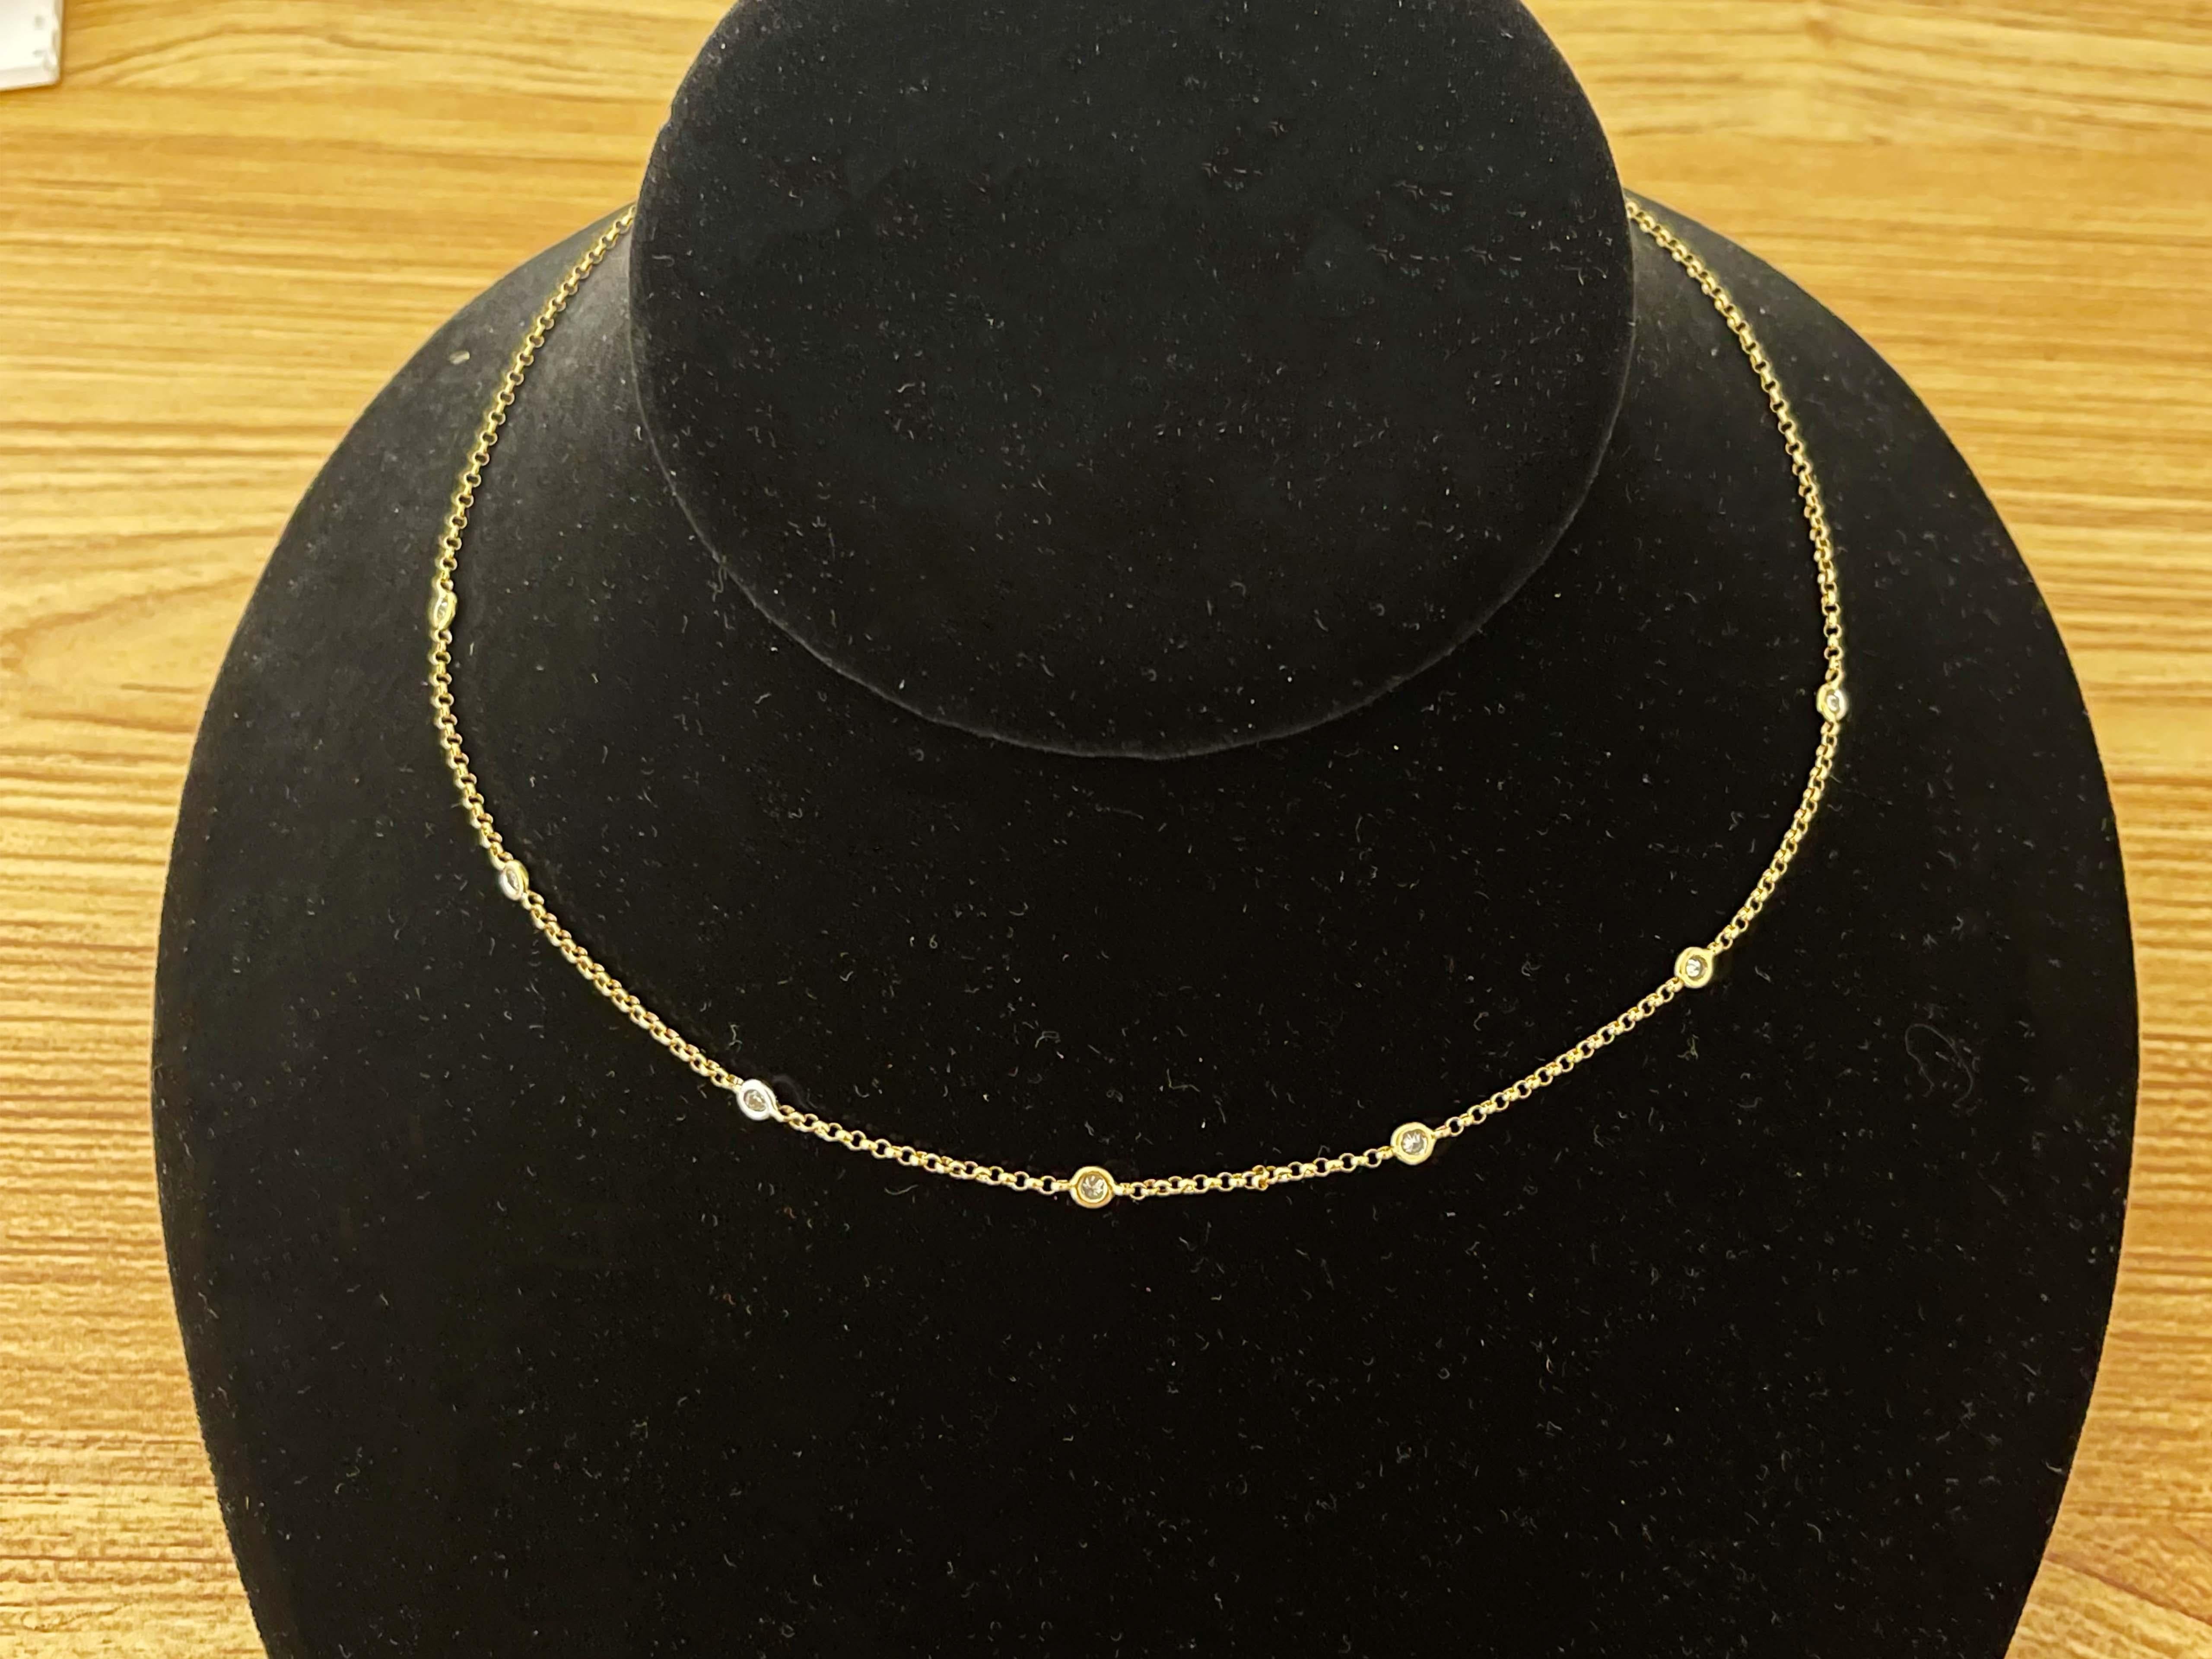 Diamonds by the Yard Necklace in 18k Yellow Gold In Excellent Condition For Sale In Honolulu, HI